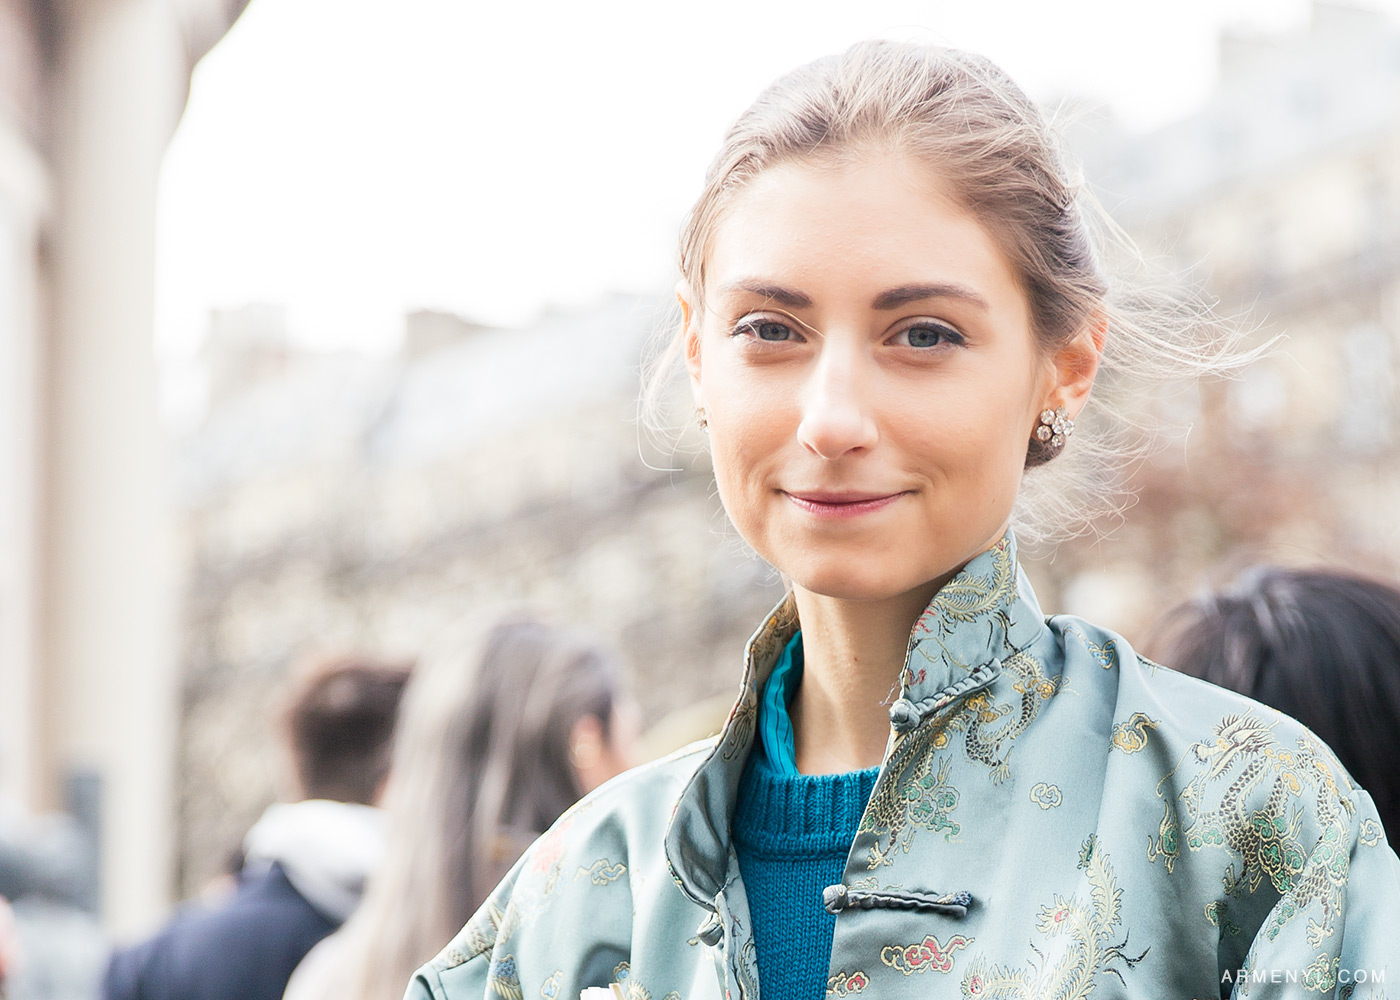 Fashion Illustrator Jenny Walton Street style outside Miu Miu AW 16 show in Paris on March 9 2016 photographed by Armenyl.com